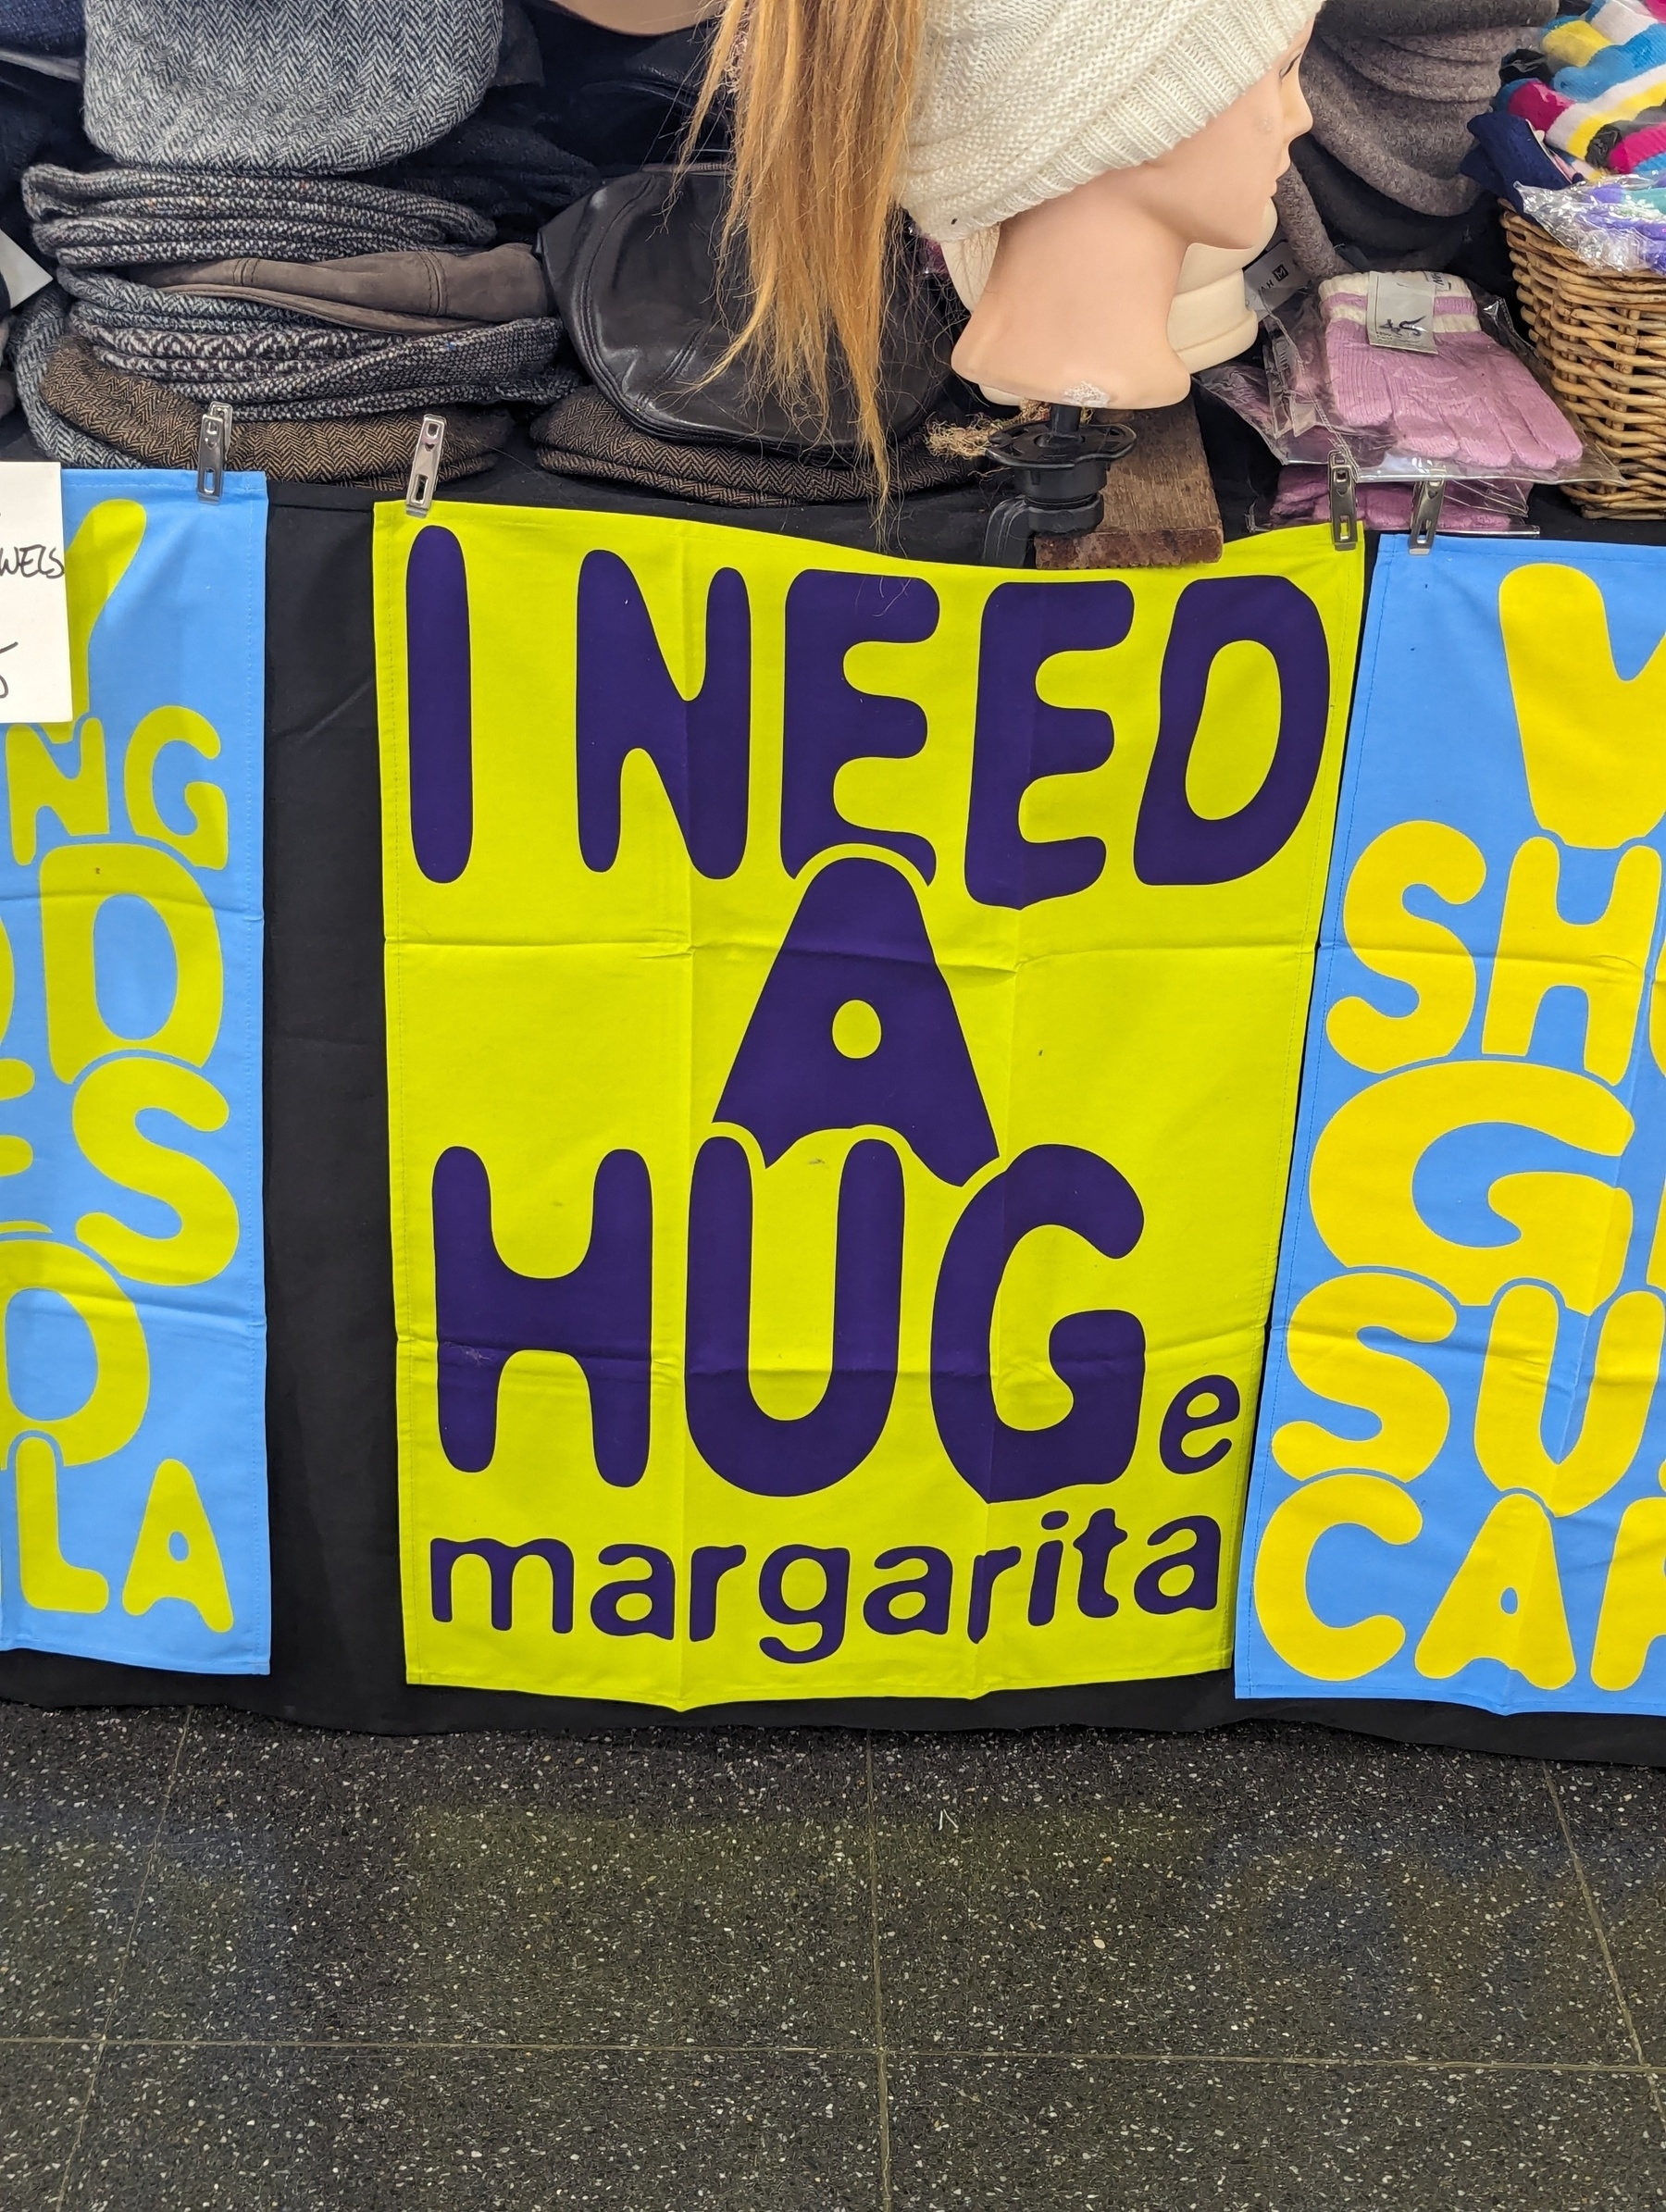 Yellow tea-towel on a display with the phrase 'I need a hug' in large letters, followed by 'huge margarita' in small letters. The first three letters of 'huge' were borrowed from the word 'hug'.